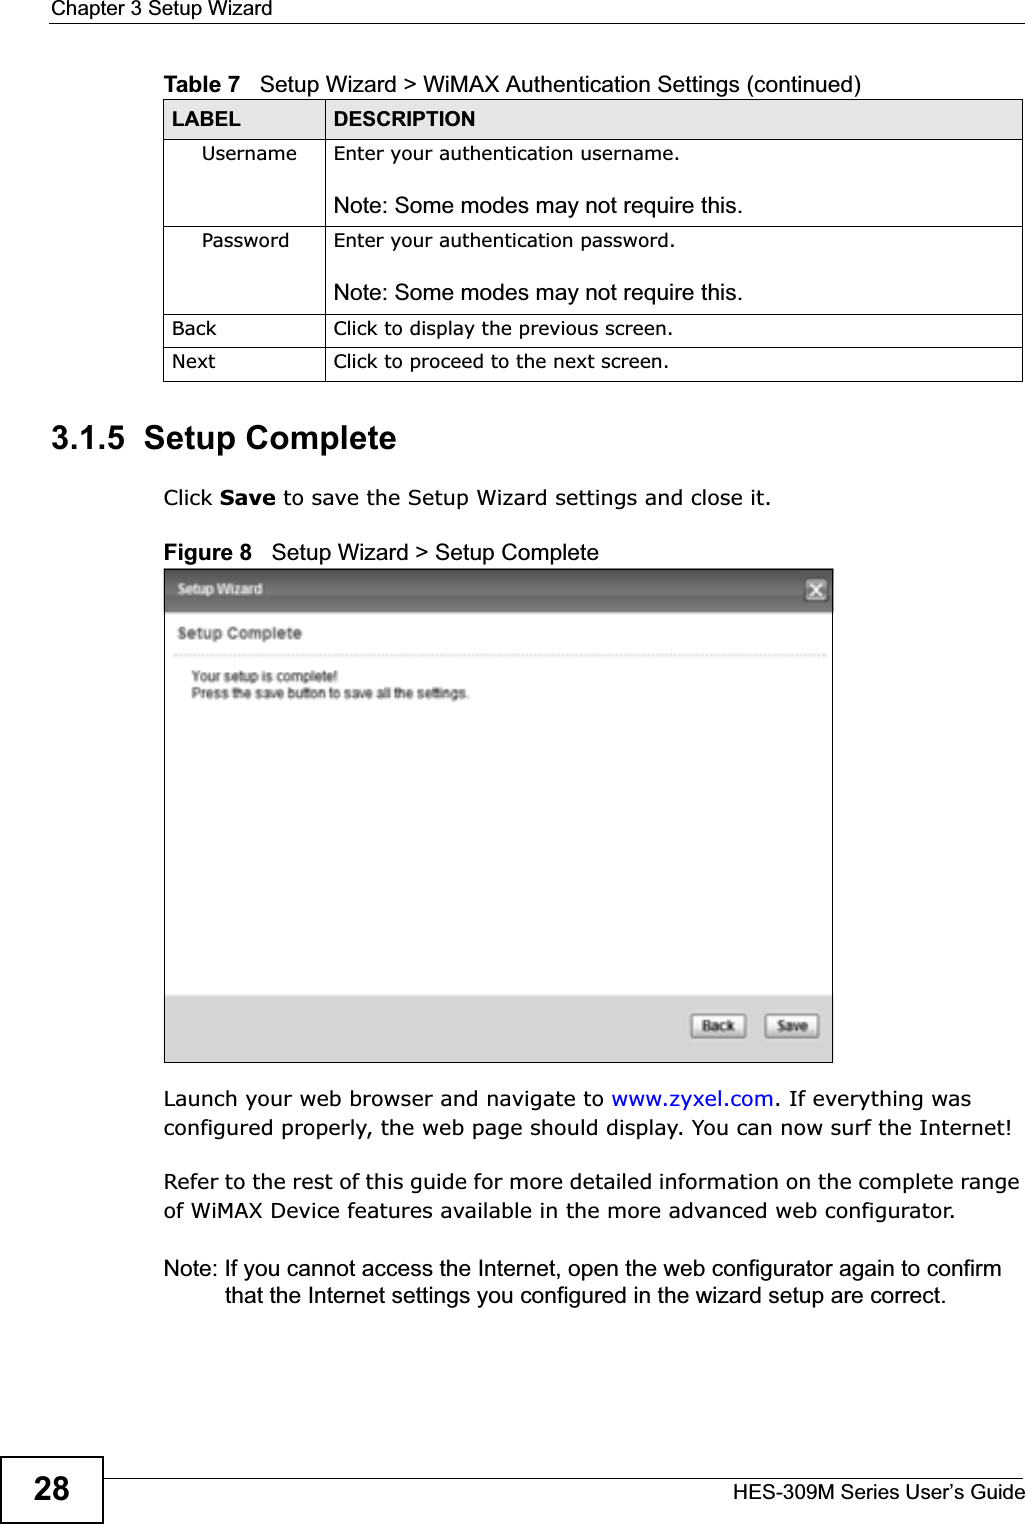 Chapter 3 Setup WizardHES-309M Series User’s Guide283.1.5  Setup CompleteClick Save to save the Setup Wizard settings and close it.Figure 8   Setup Wizard &gt; Setup CompleteLaunch your web browser and navigate to www.zyxel.com. If everything was configured properly, the web page should display. You can now surf the Internet!Refer to the rest of this guide for more detailed information on the complete range of WiMAX Device features available in the more advanced web configurator. Note: If you cannot access the Internet, open the web configurator again to confirm that the Internet settings you configured in the wizard setup are correct.Username Enter your authentication username.Note: Some modes may not require this.Password Enter your authentication password.Note: Some modes may not require this.Back Click to display the previous screen.Next Click to proceed to the next screen. Table 7   Setup Wizard &gt; WiMAX Authentication Settings (continued)LABEL DESCRIPTION